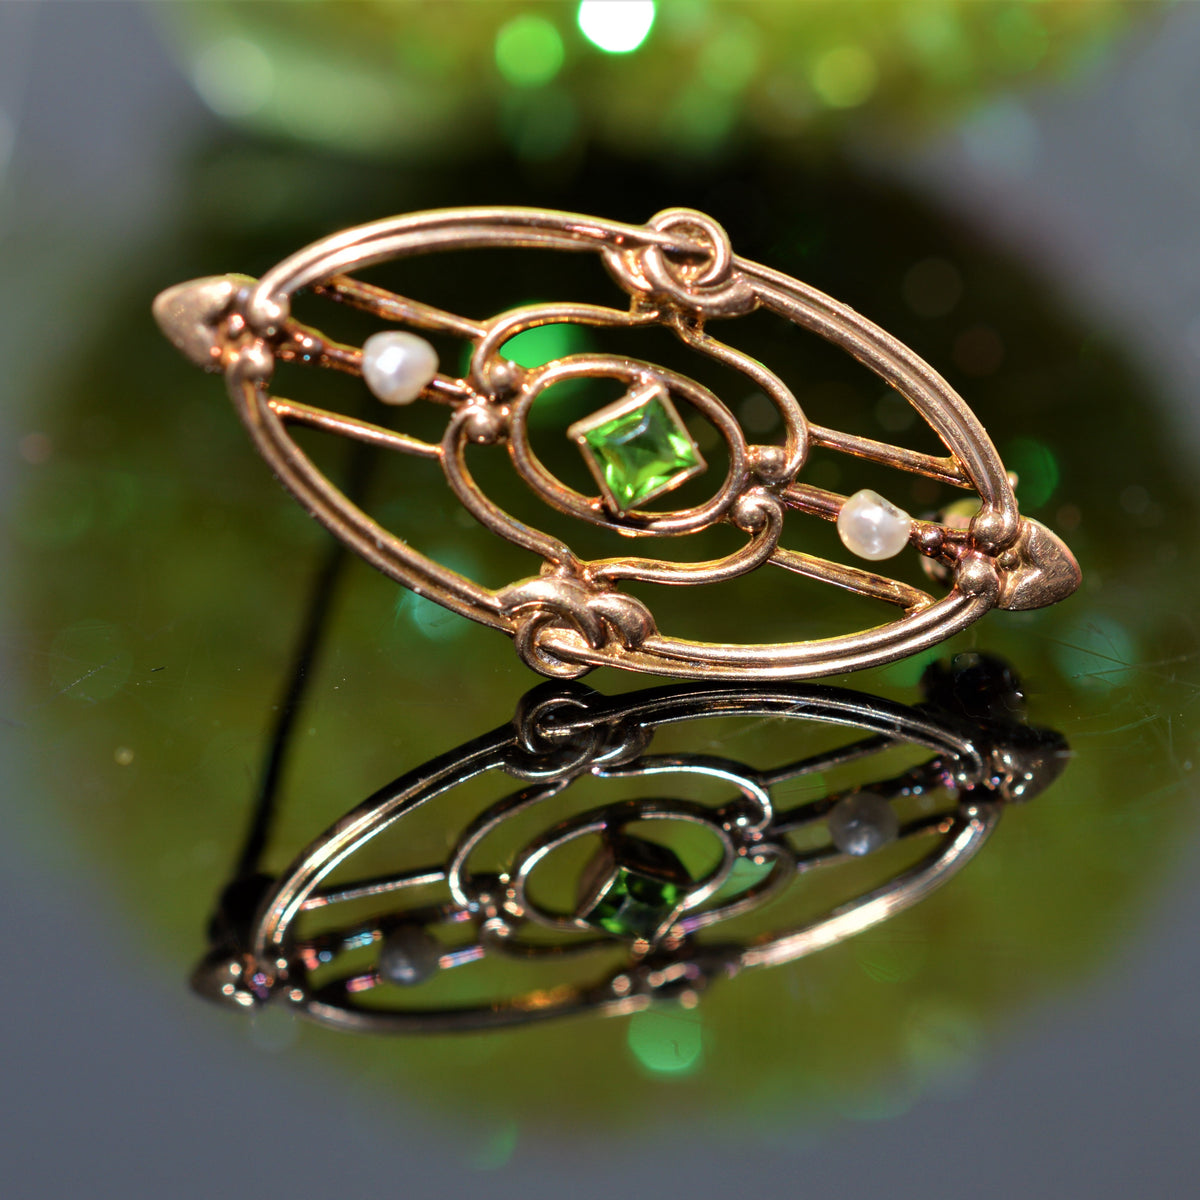 10K Yellow Gold Oval Brooch With Green Glass and Pearls